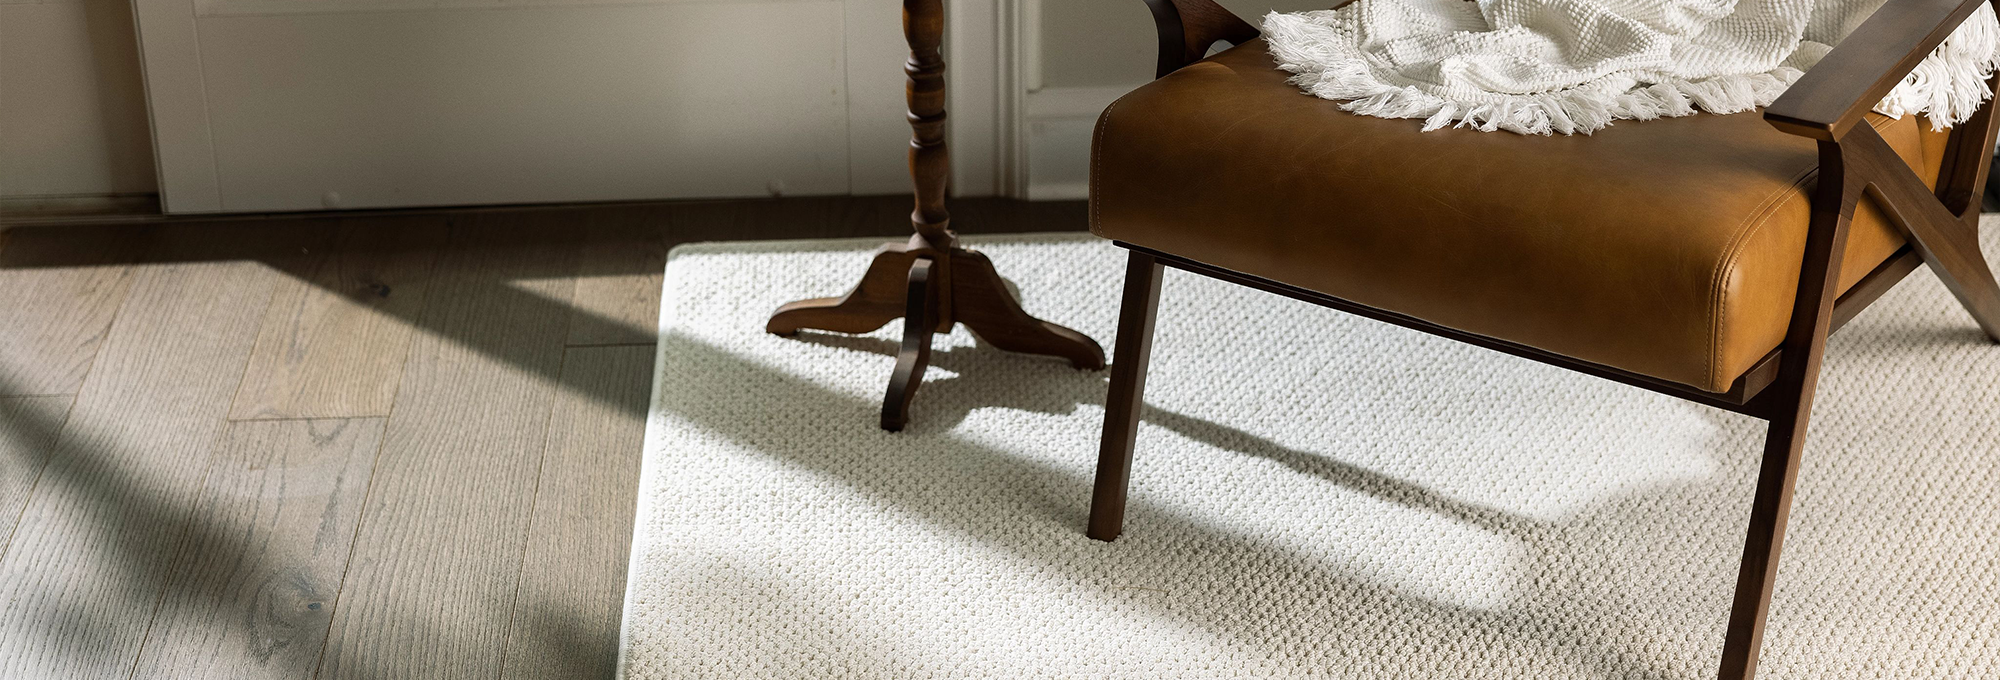 Chair on carpet floor - - Contract Interiors IN